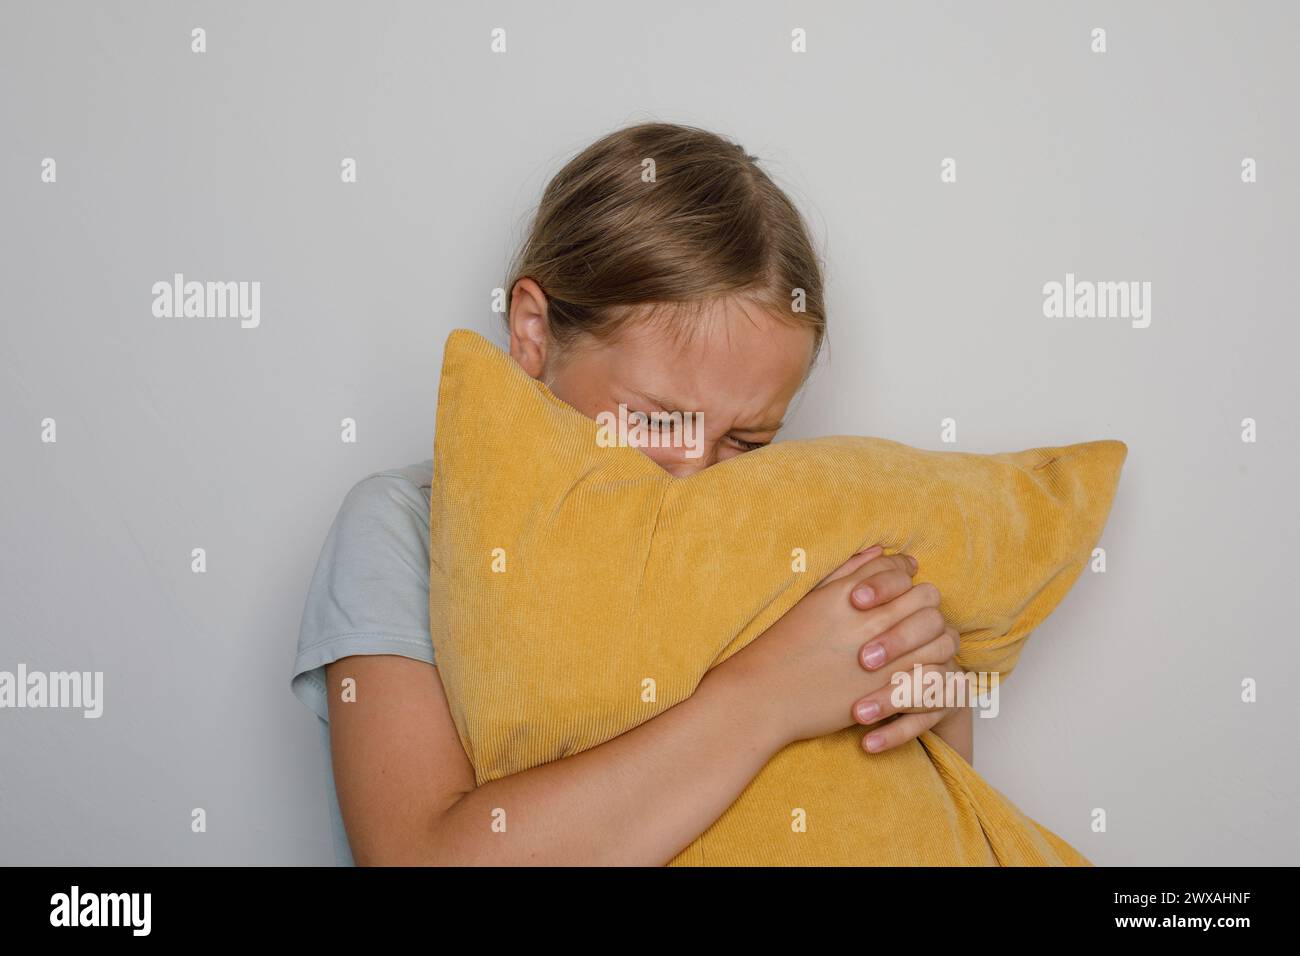 Cute child girl crying and embracing yellow pillow against white domestic wall at home Stock Photo